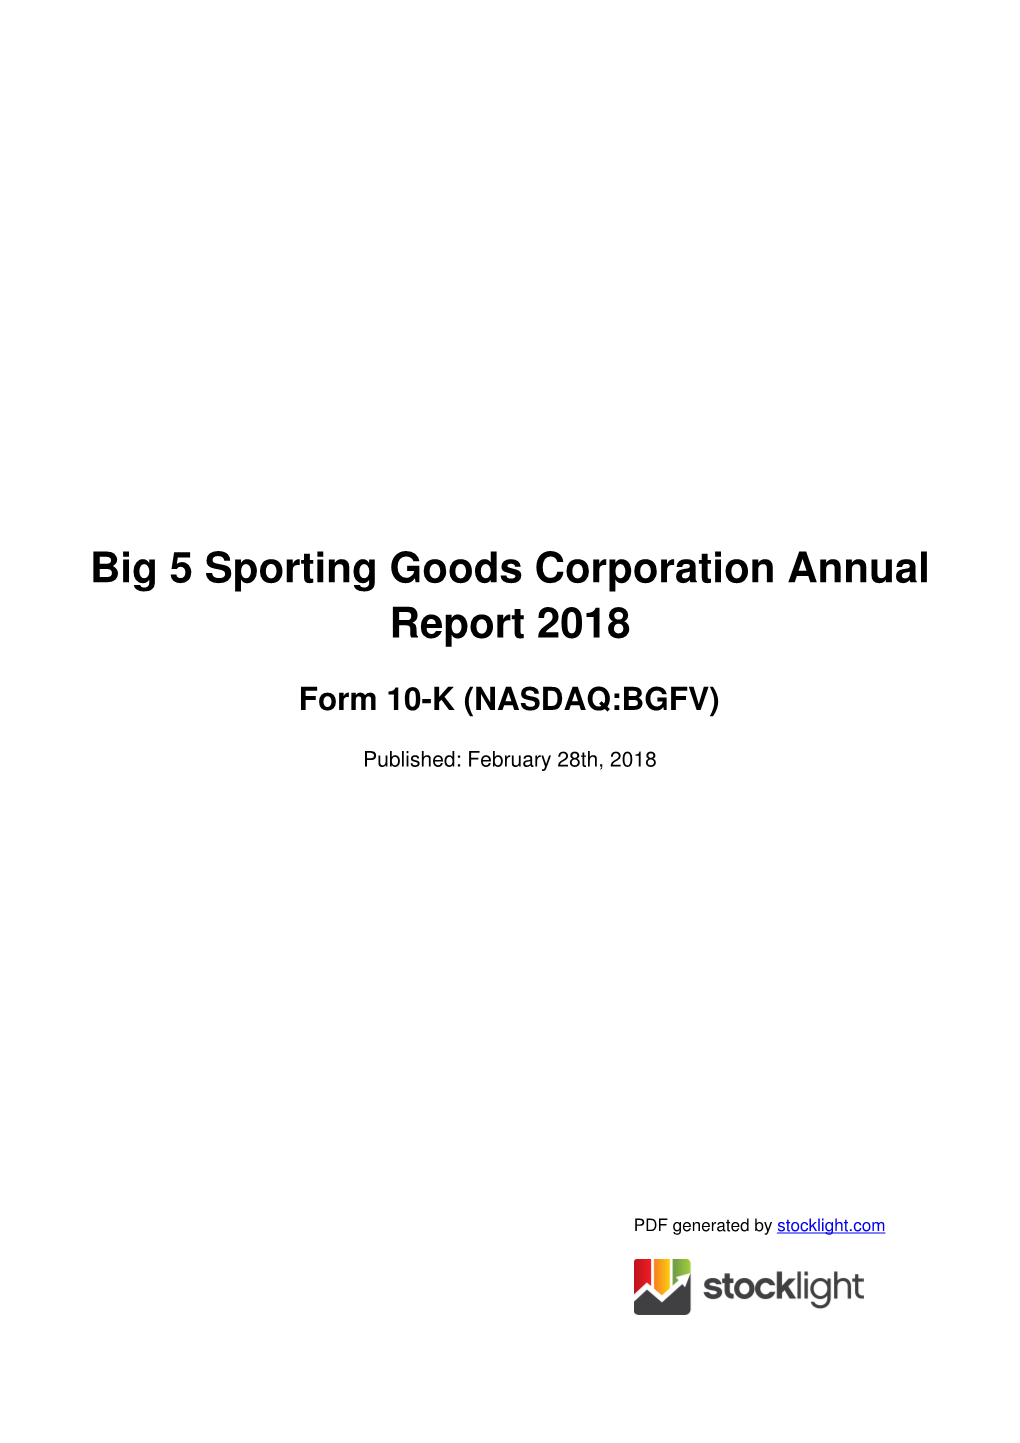 Big 5 Sporting Goods Corporation Annual Report 2018